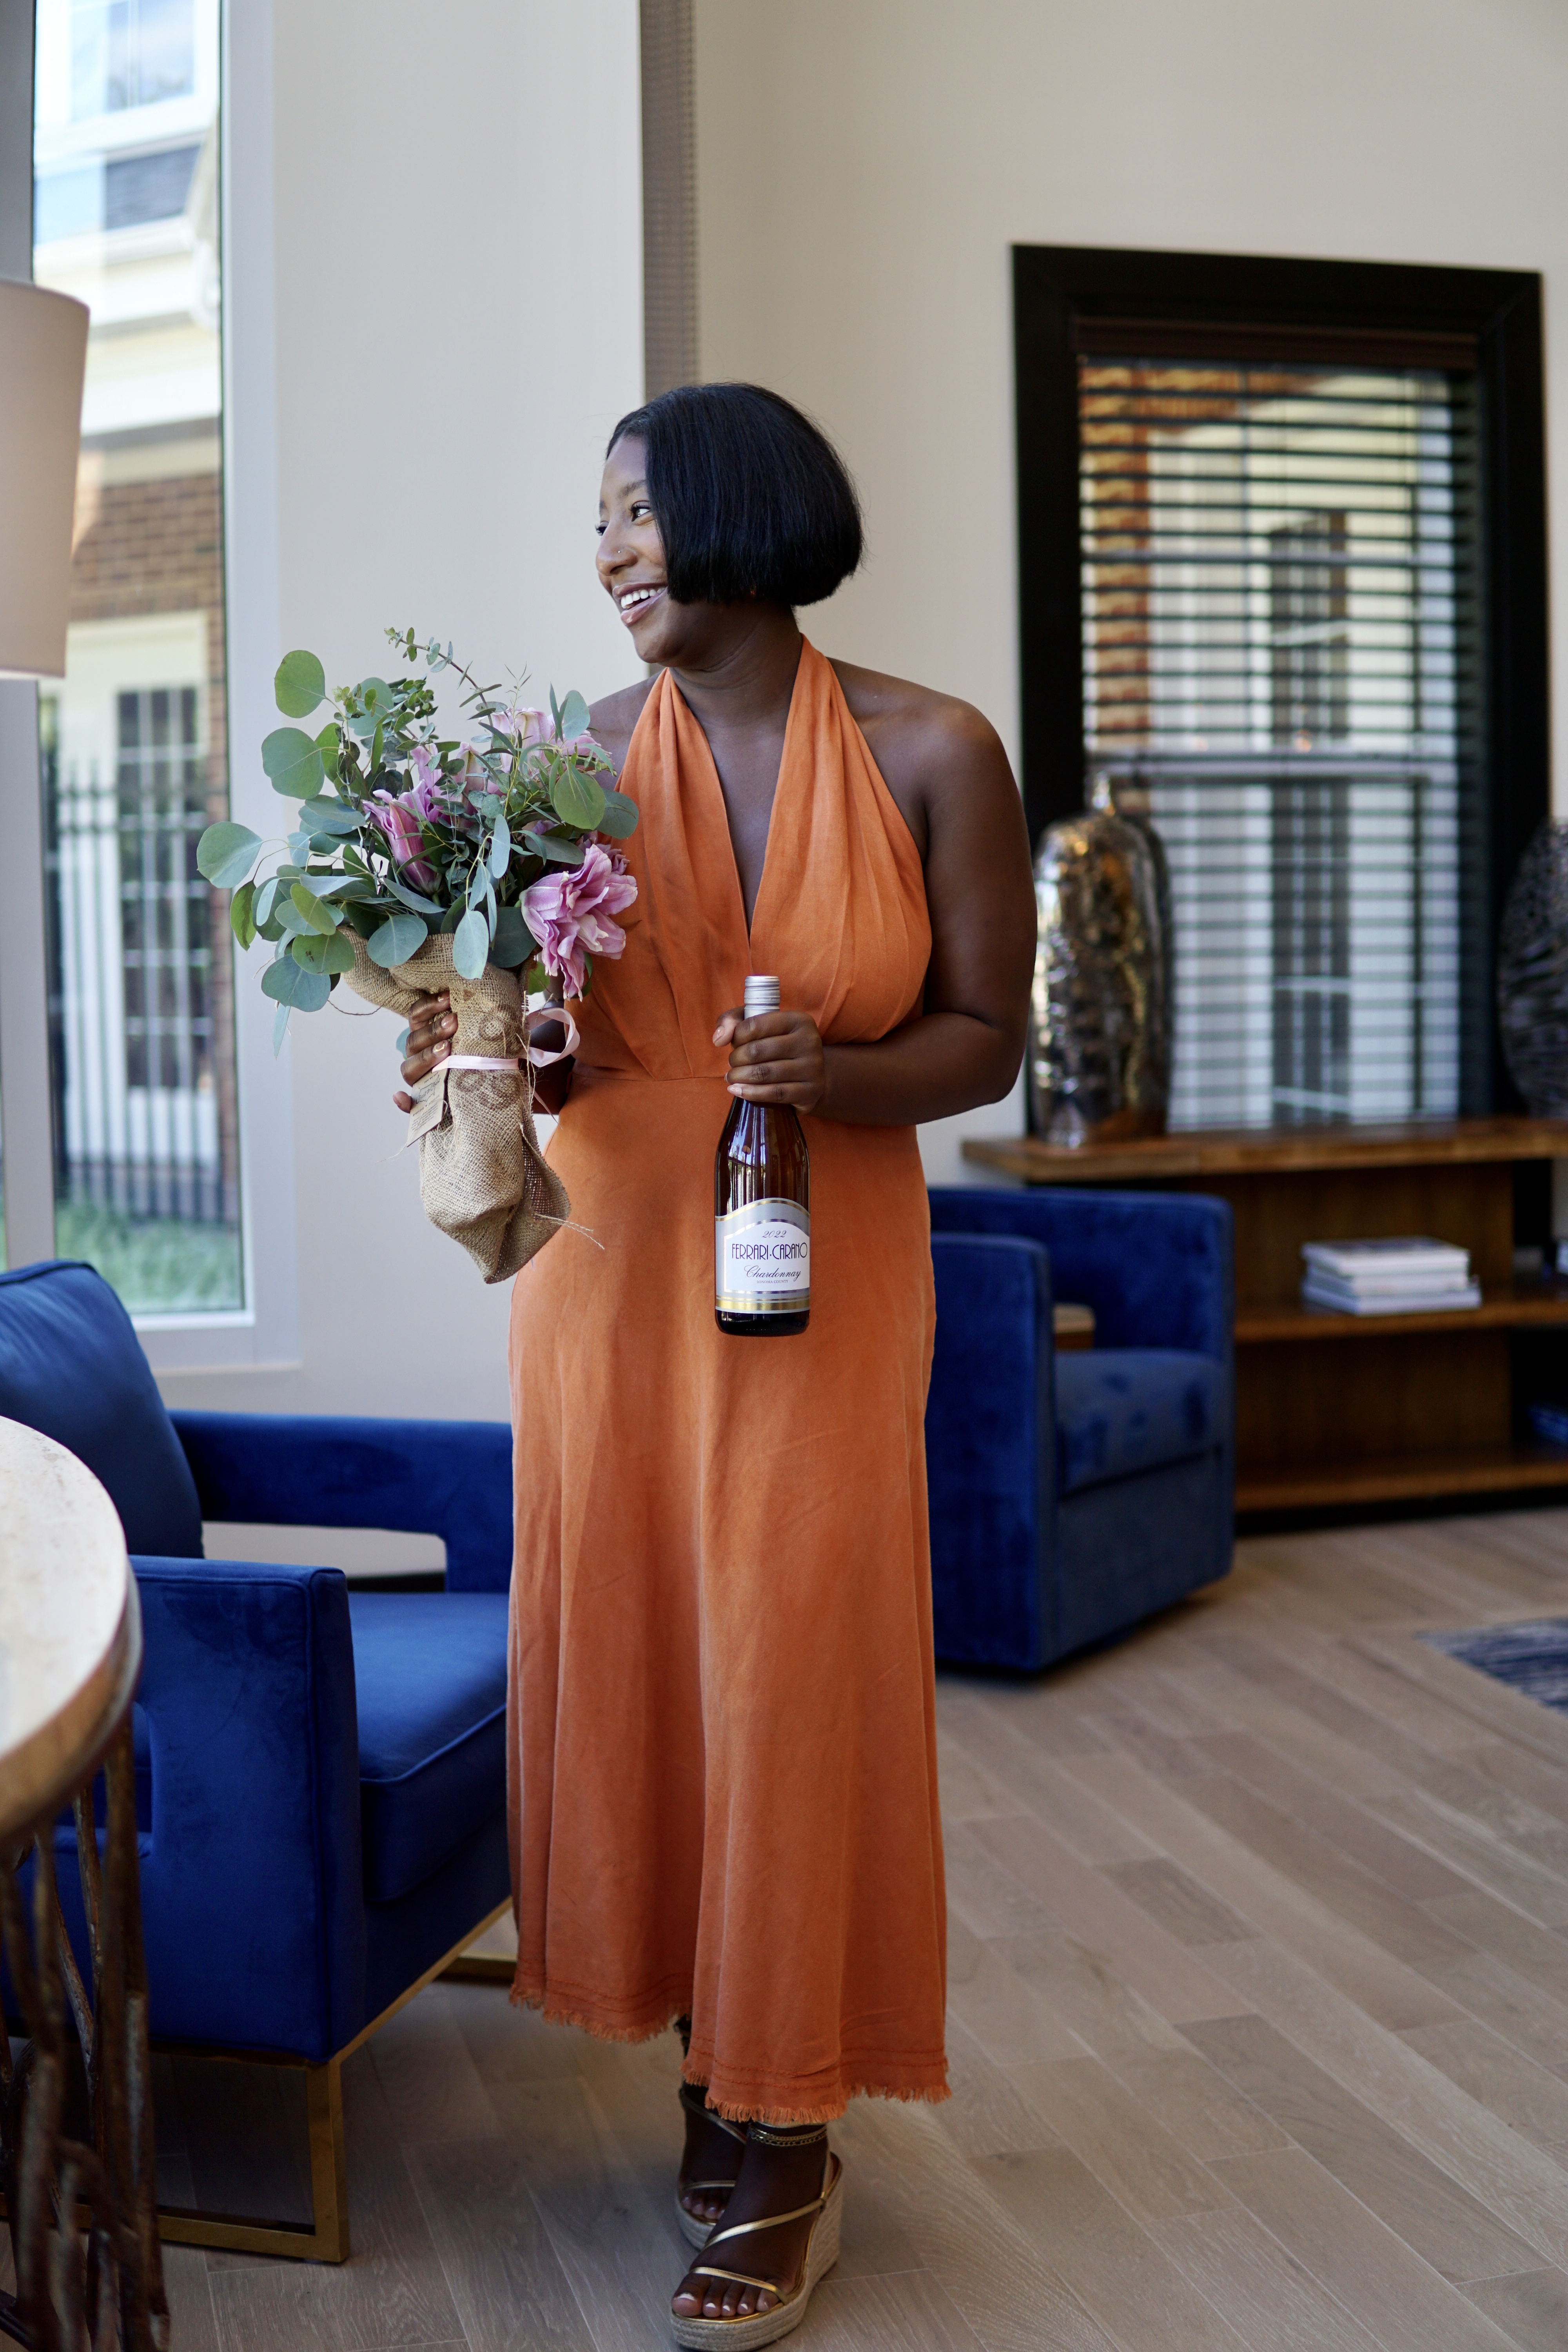 Desiree founder of wino noire holding a bottle of wine and flowers